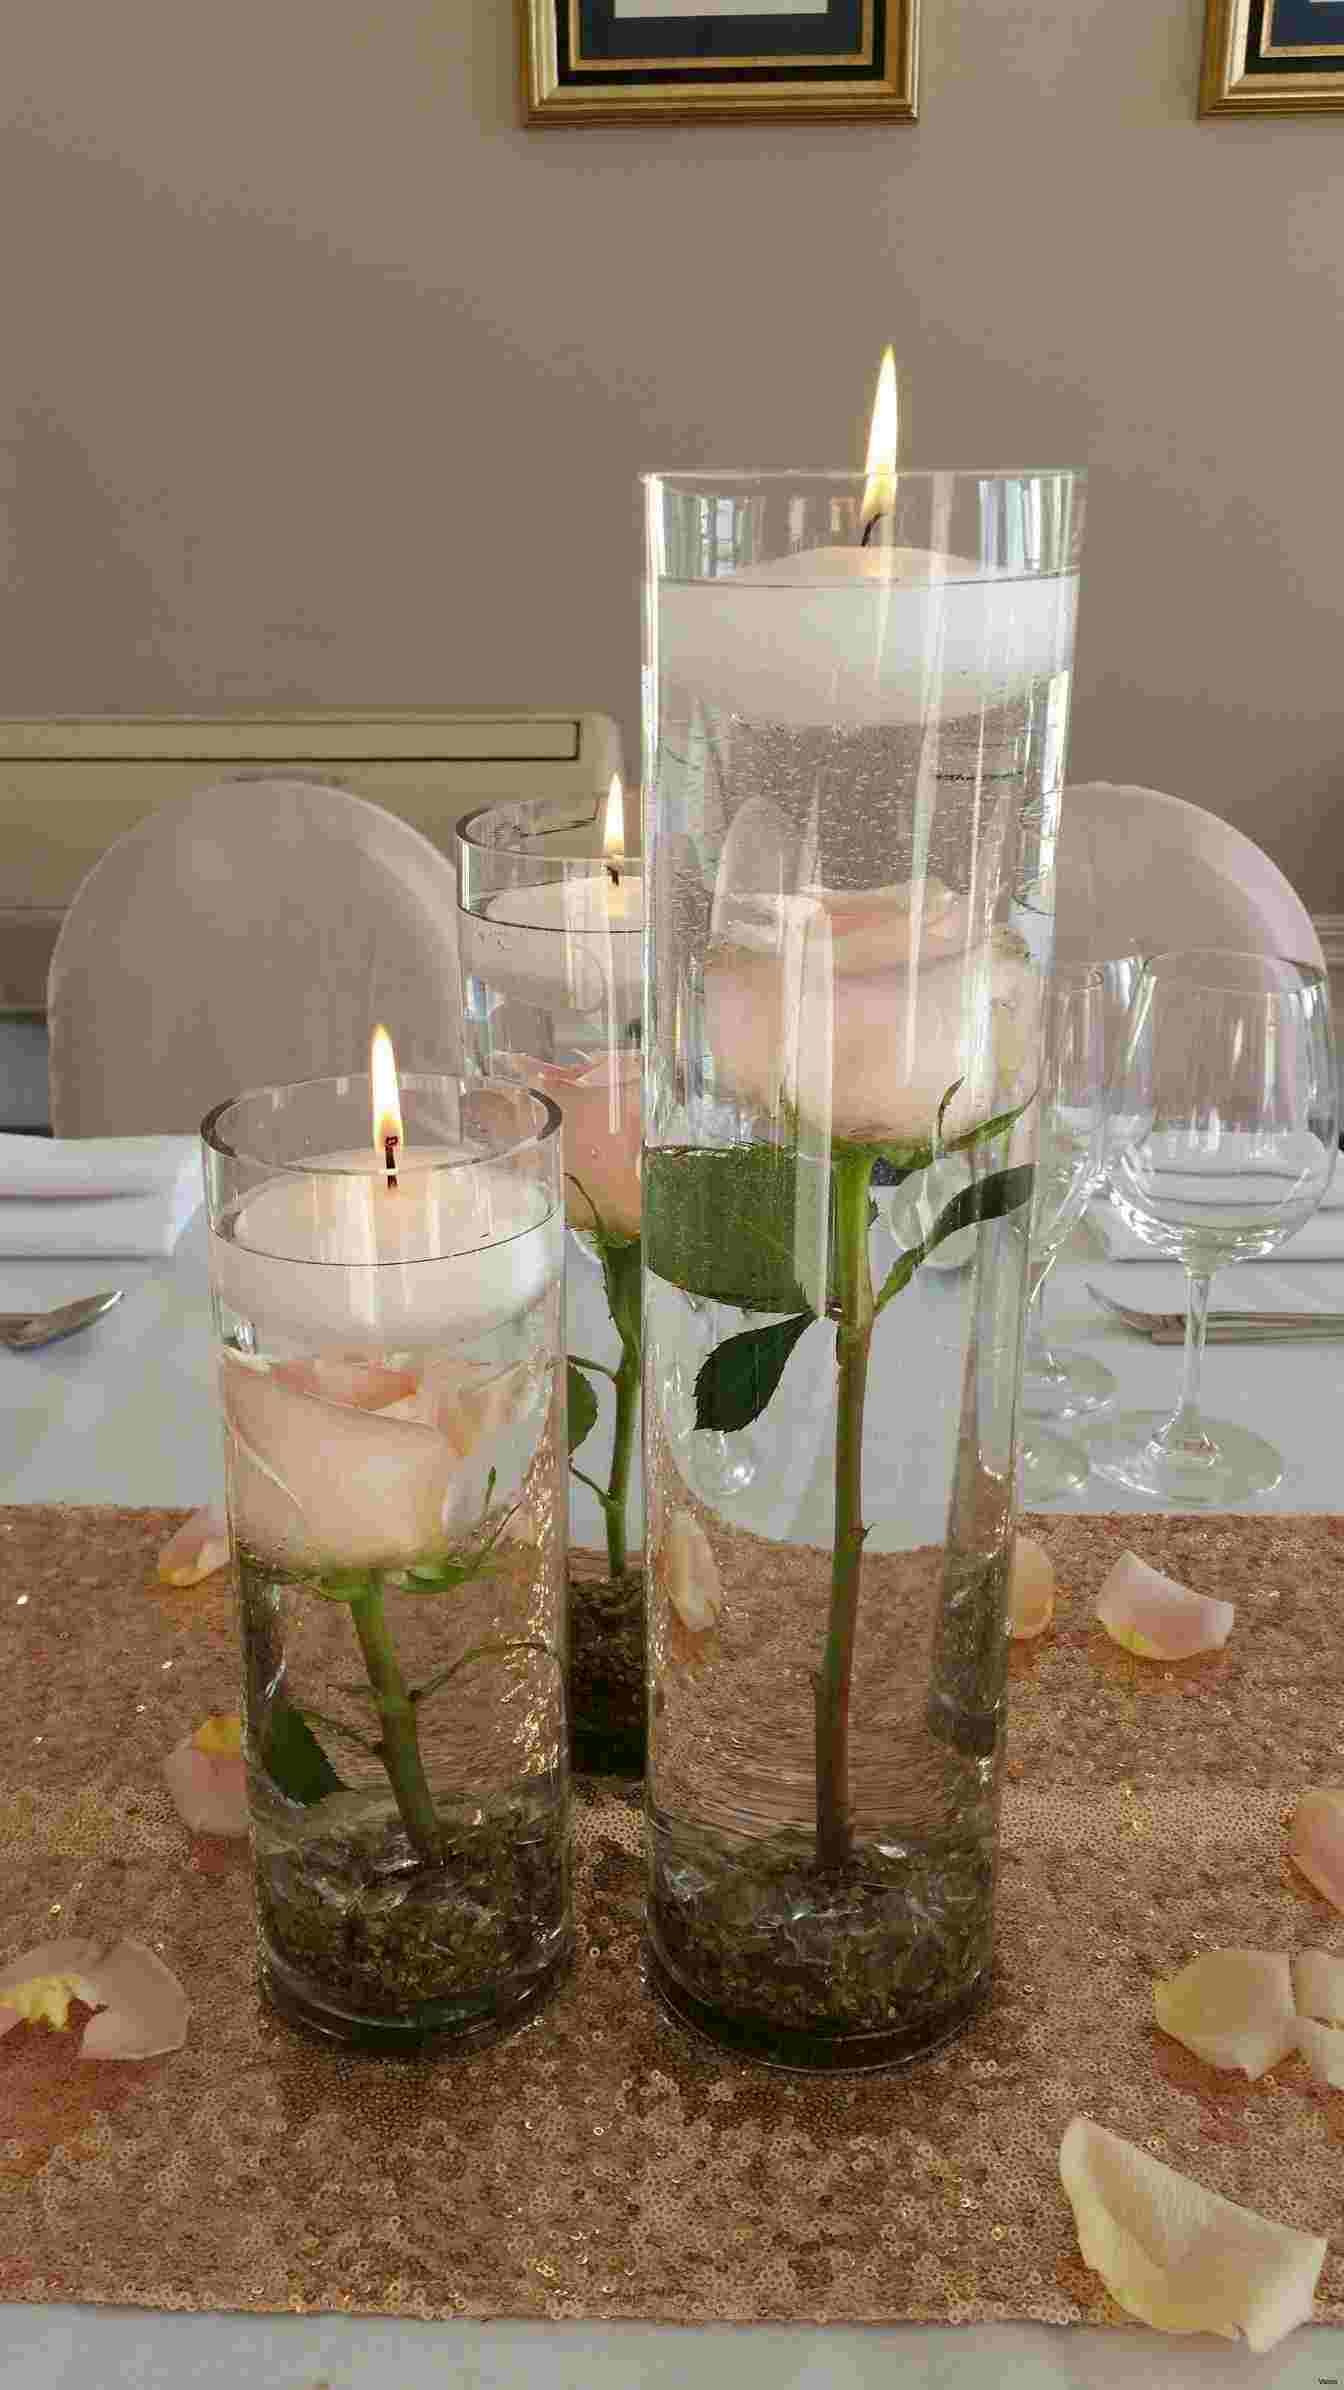 19 Lovable Tall Glass Candle Vases 2024 free download tall glass candle vases of mason jar vase awesome floating candle ideas luxury although tall inside mason jar vase awesome floating candle ideas luxury although tall vase centerpiece ideas